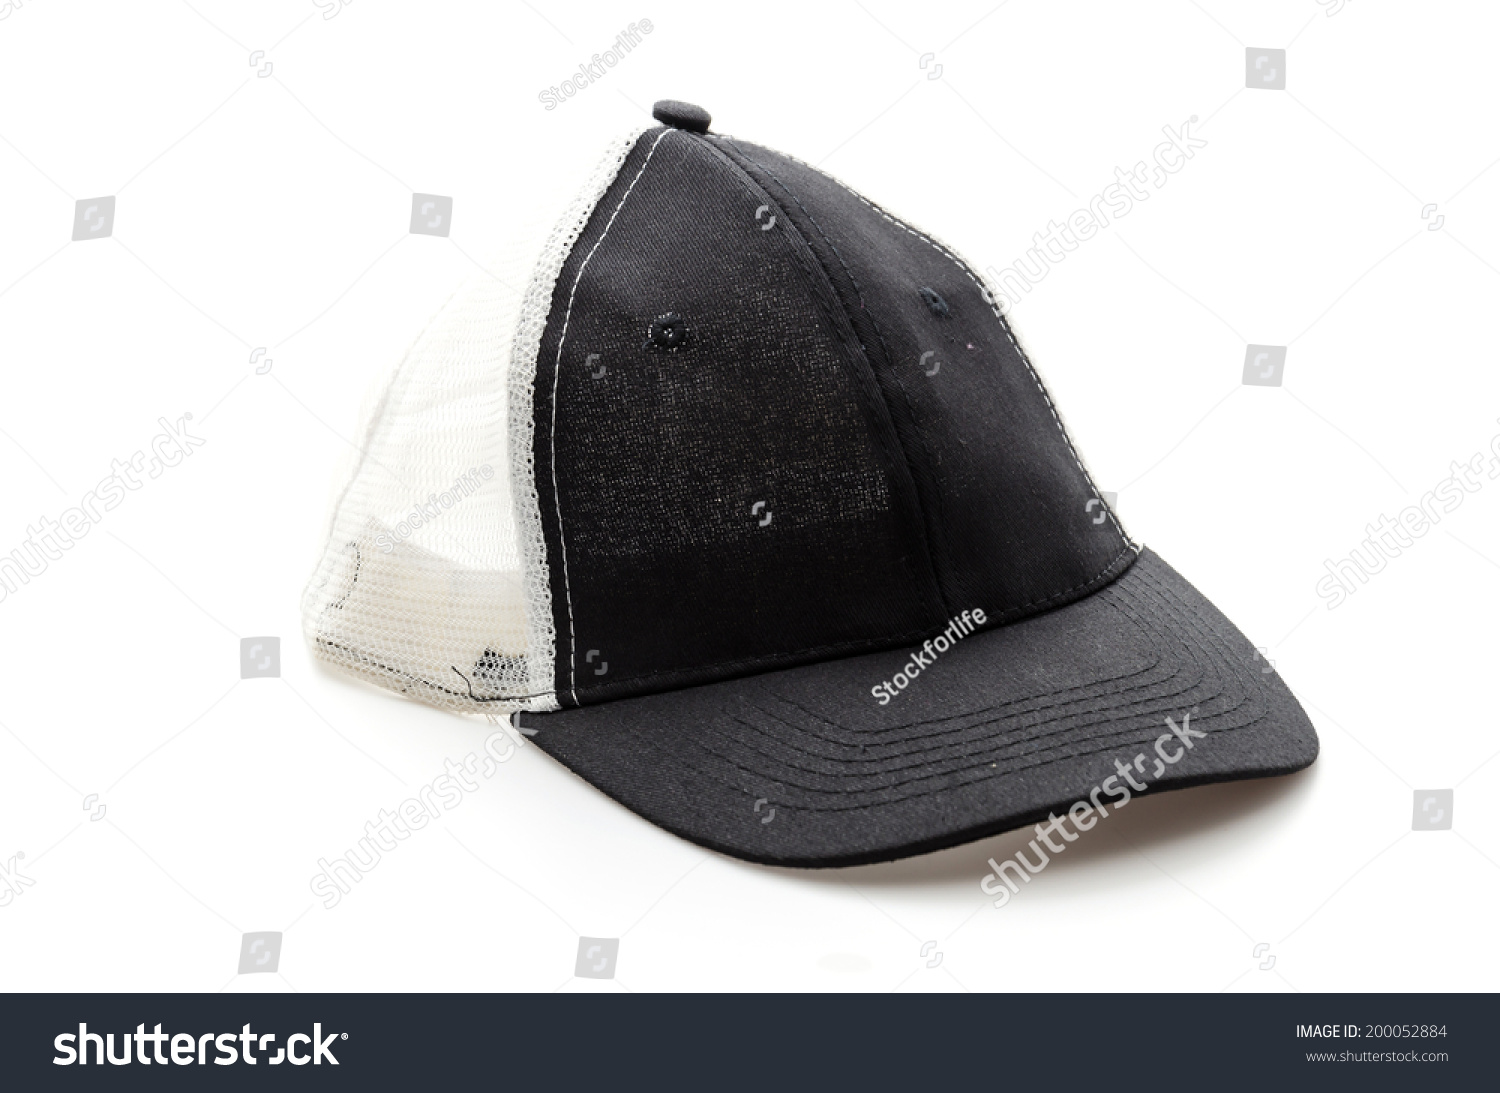 Cap Isolated On White Stock Photo 200052884 : Shutterstock